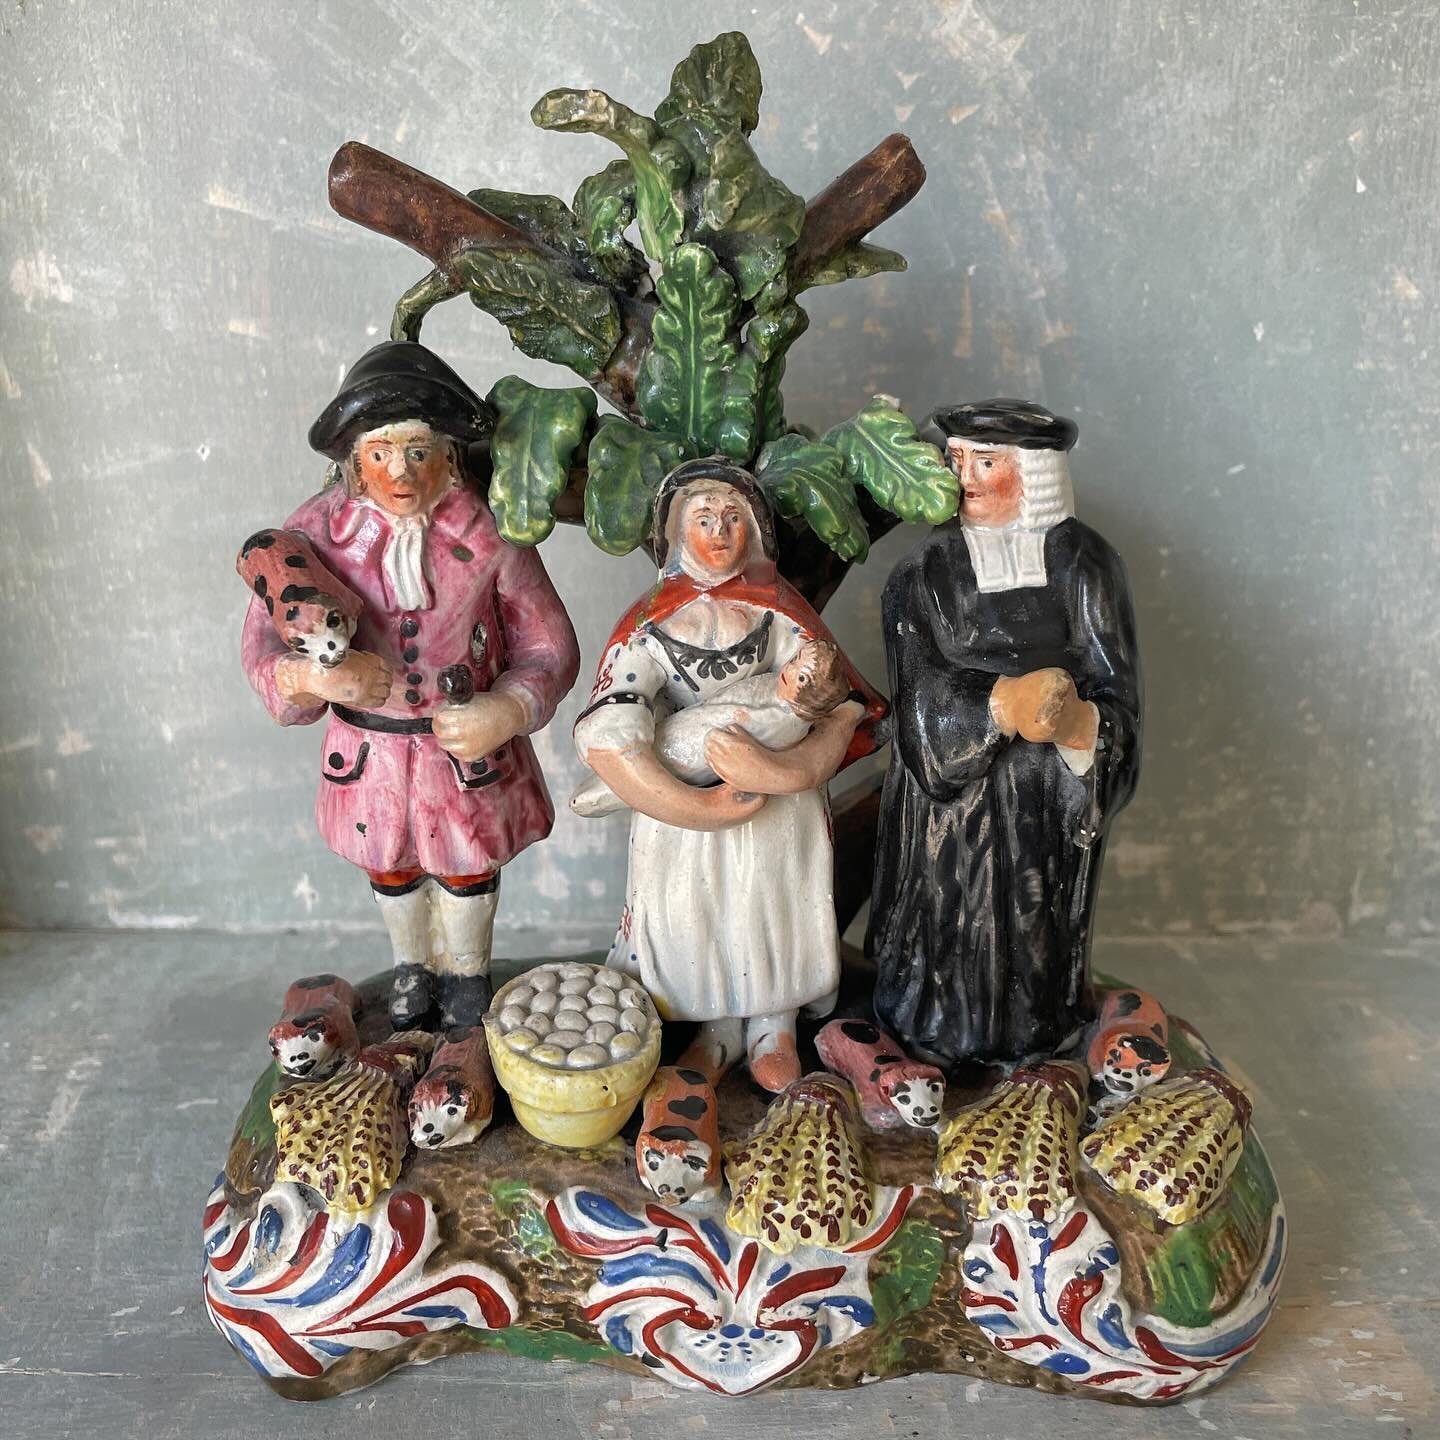 FOR SALE A particularly appealing and colourful example of &lsquo;The Tithe Pig&rsquo;, circa 1830. It is a well known Staffordshire pottery figure depicting a farmer holding a pig, his wife with babe in arms and a clergyman. It is a very amusing sce